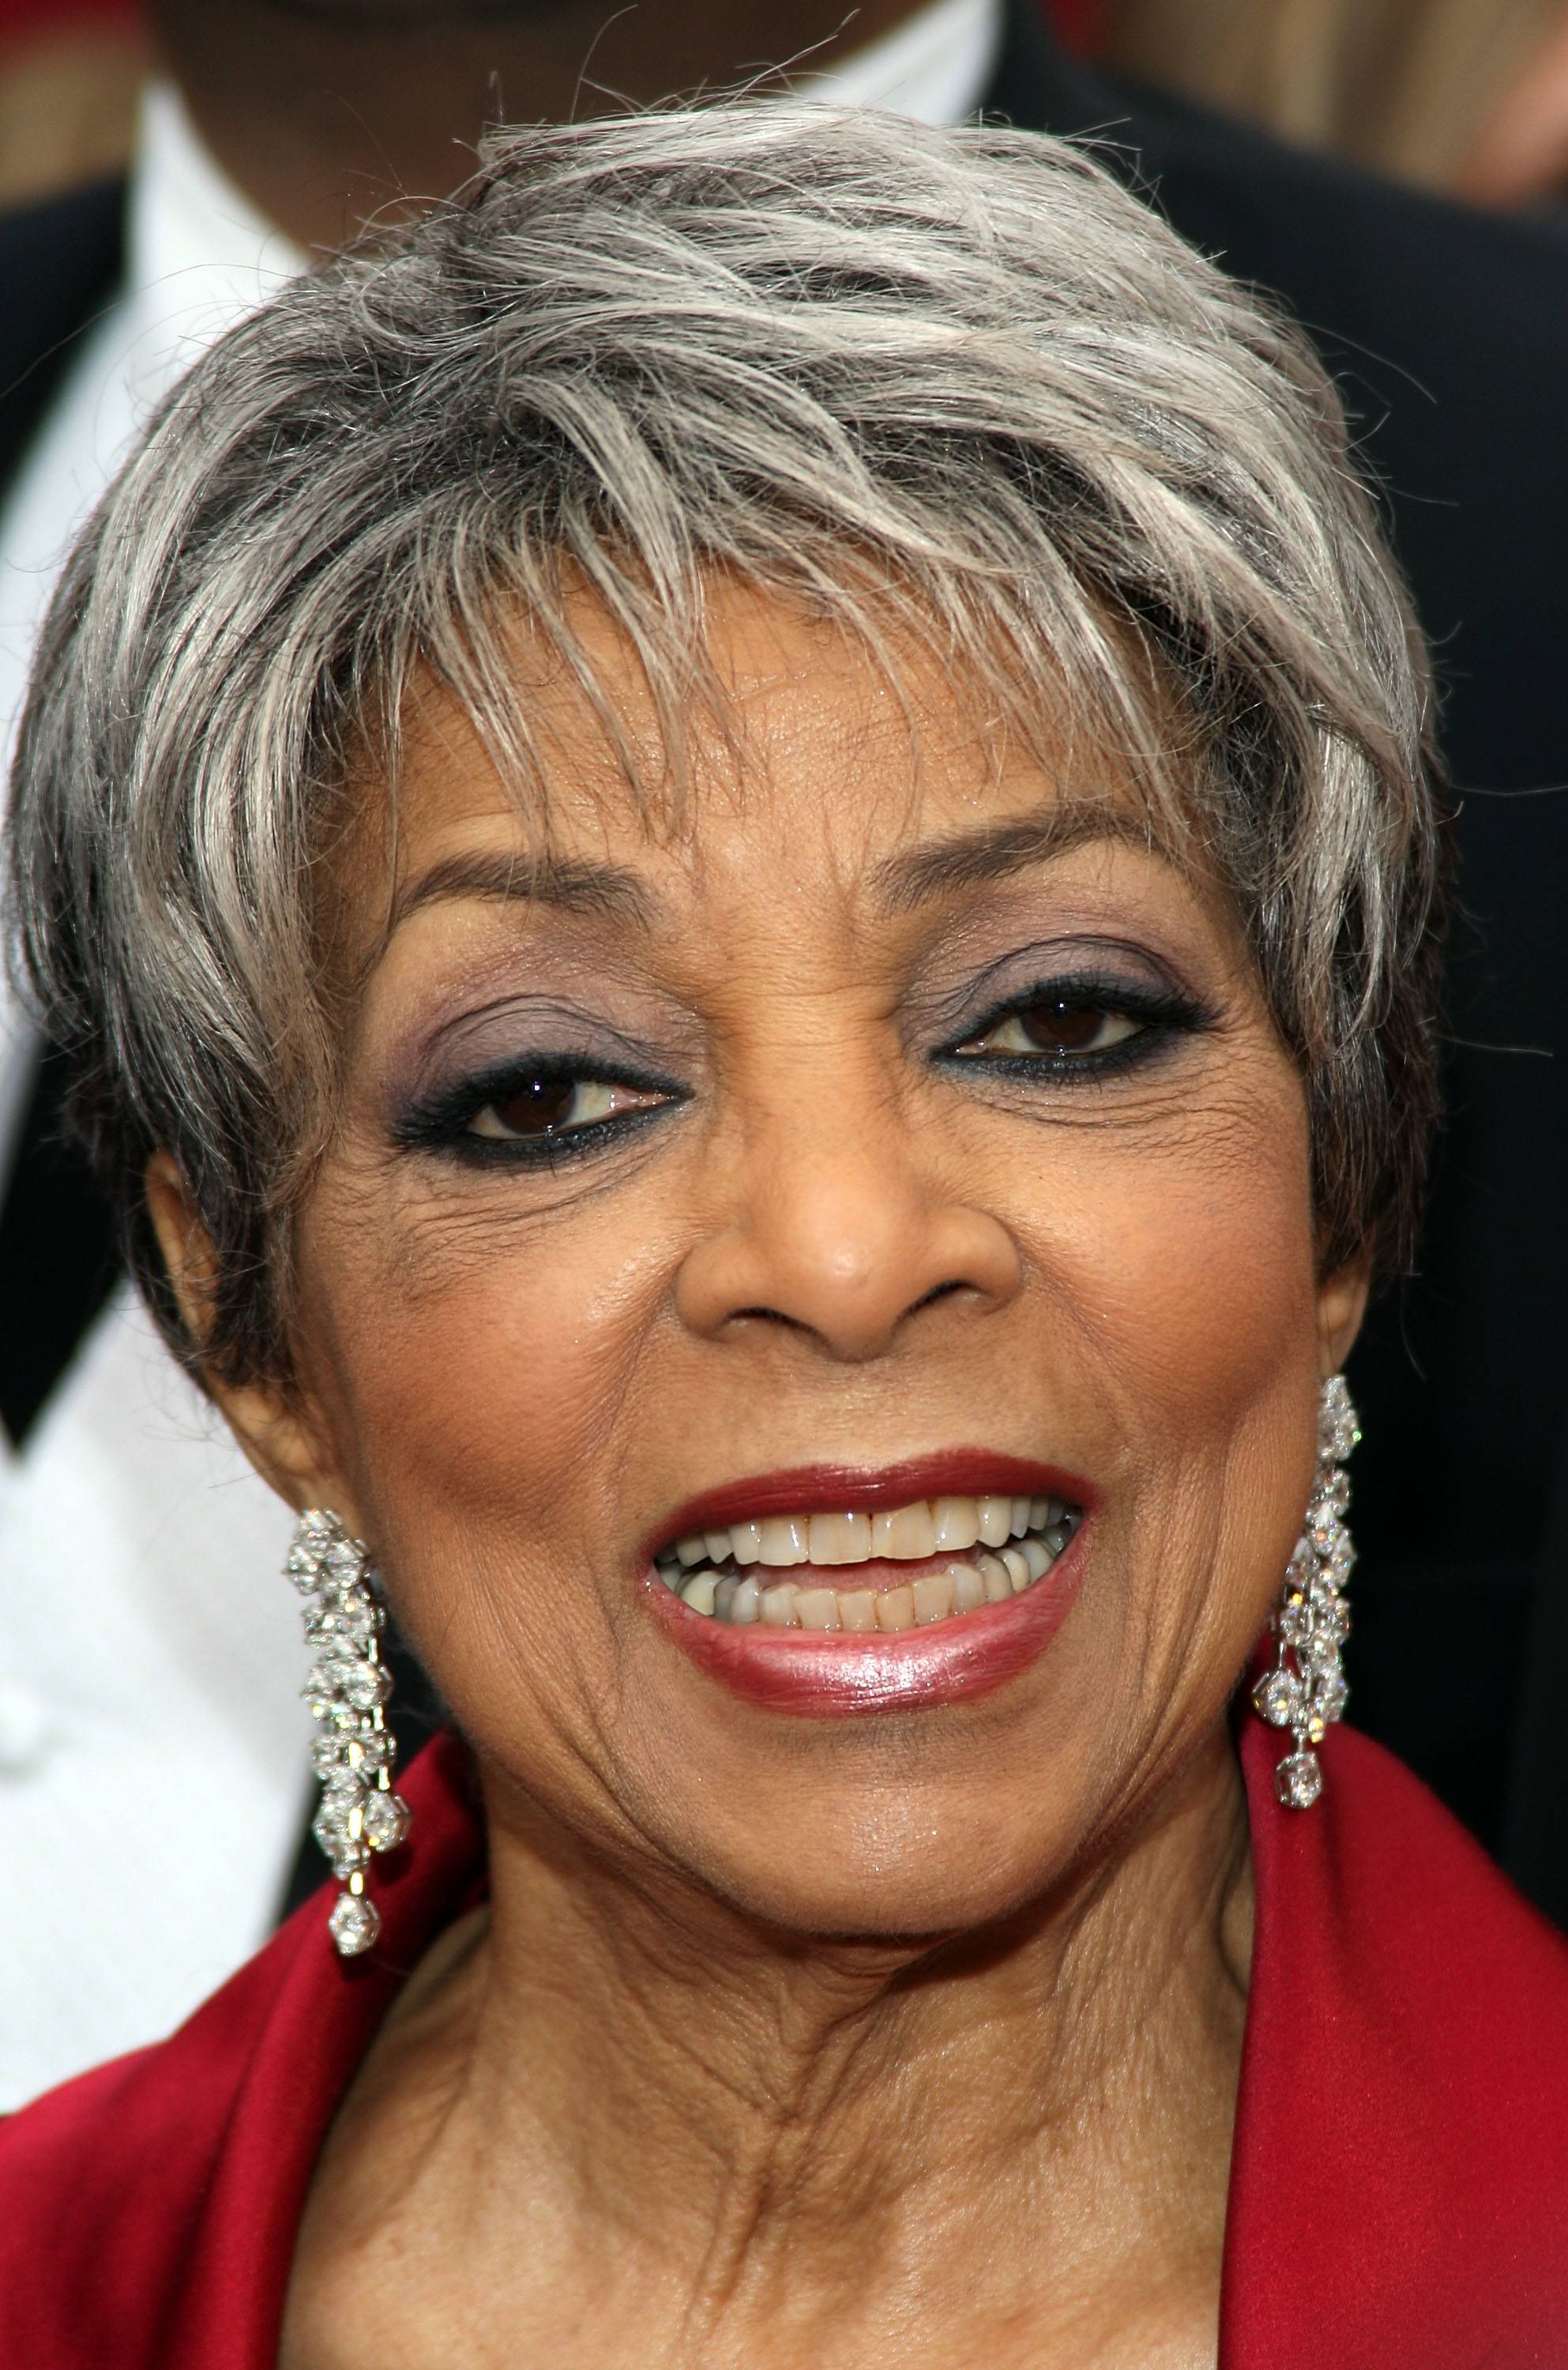 HOLLYWOOD - FEBRUARY 24:  Actress Ruby Dee arrives at the 80th Annual Academy Awards held at the Kodak Theatre on February 24, 2008 in Hollywood, California.  (Photo by Frederick M. Brown/Getty Images)